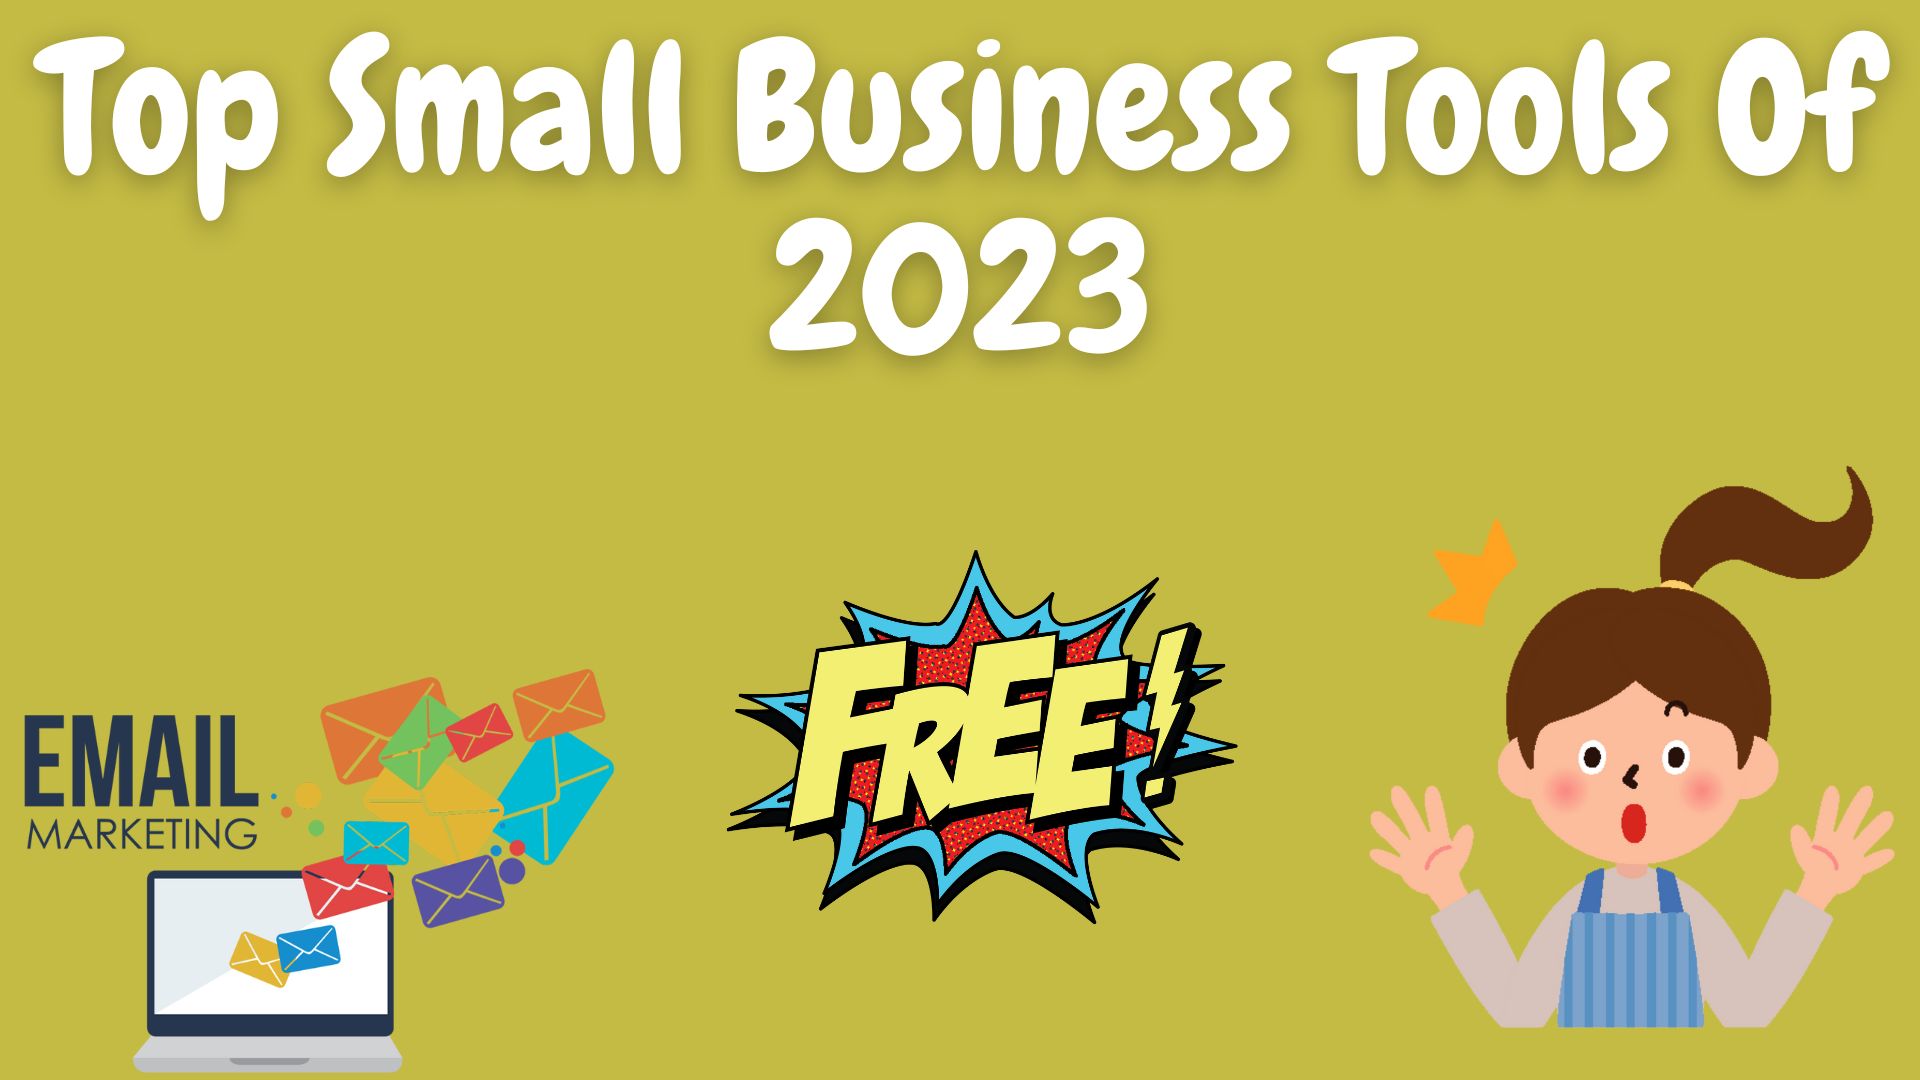 Top small business tools of 2023